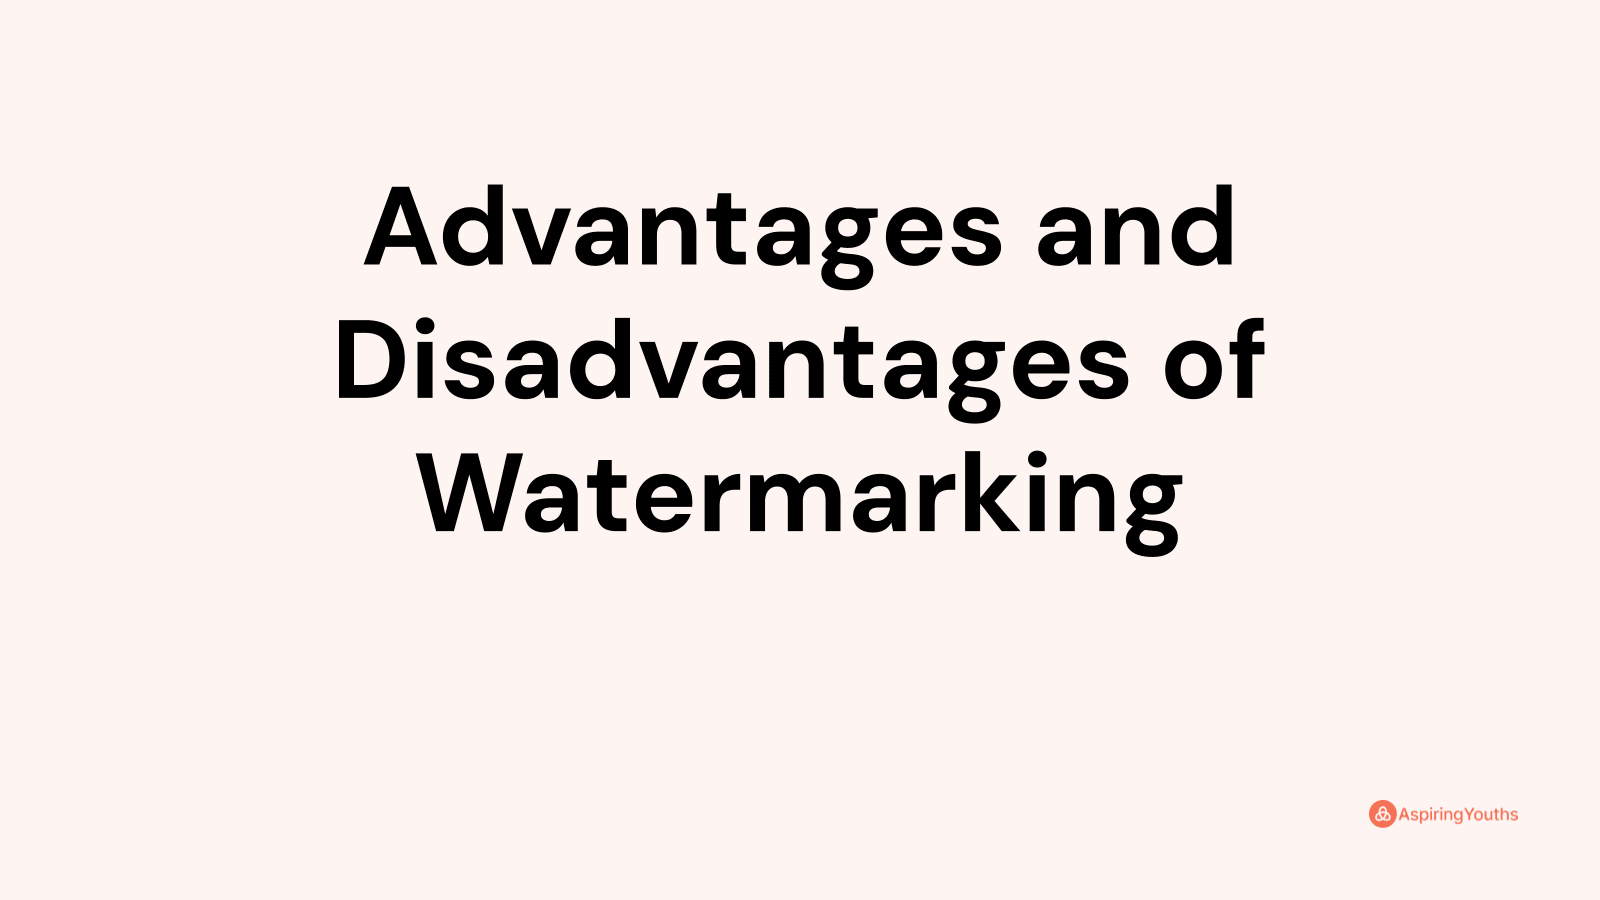 Advantages and disadvantages of Watermarking